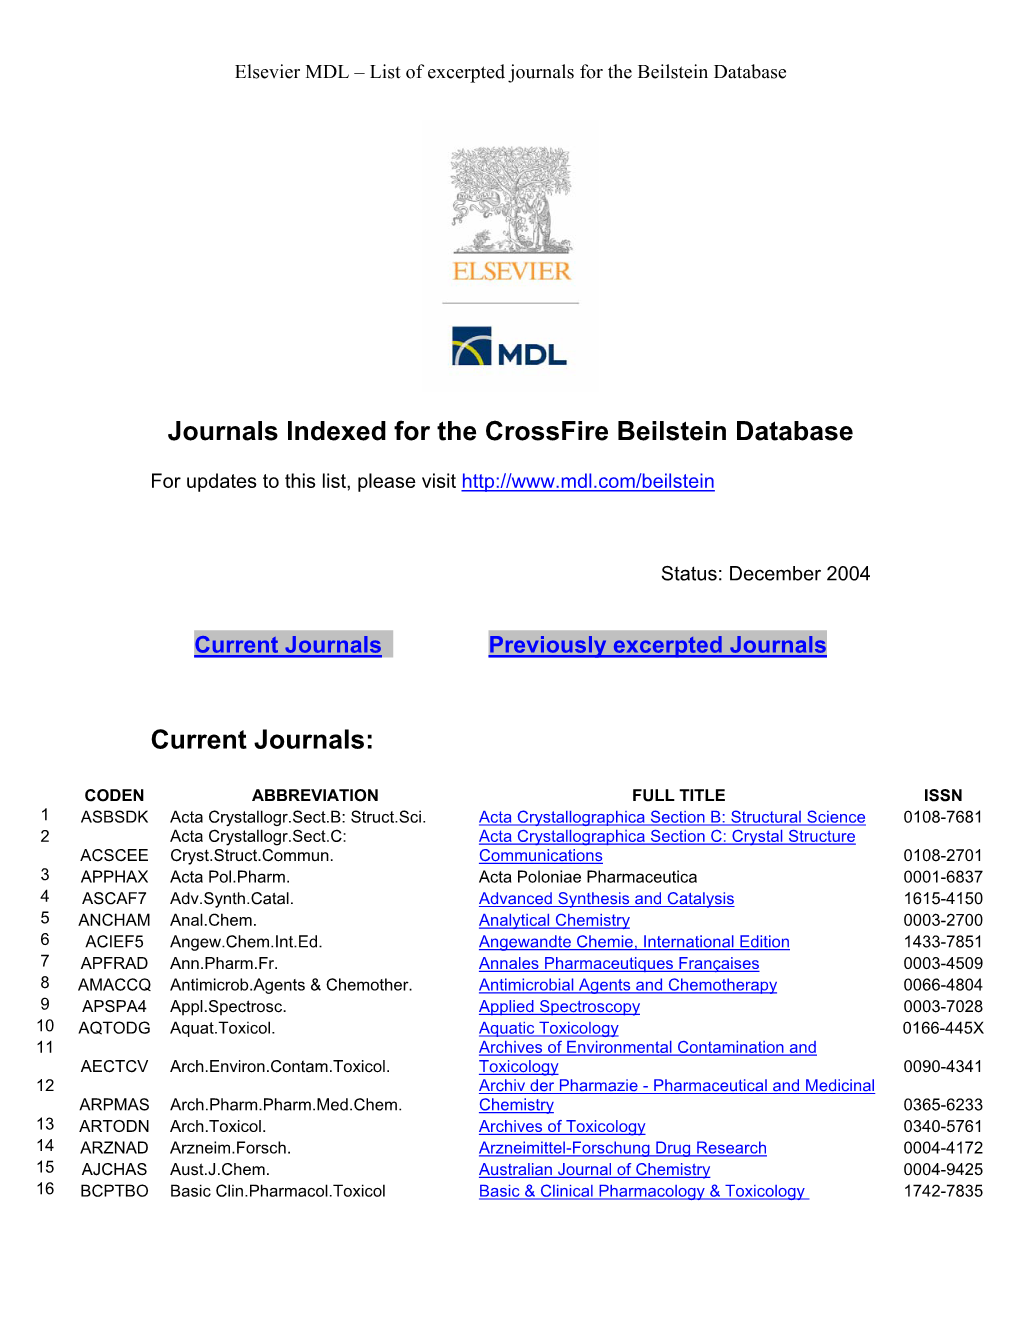 Journals Indexed for the Crossfire Beilstein Database